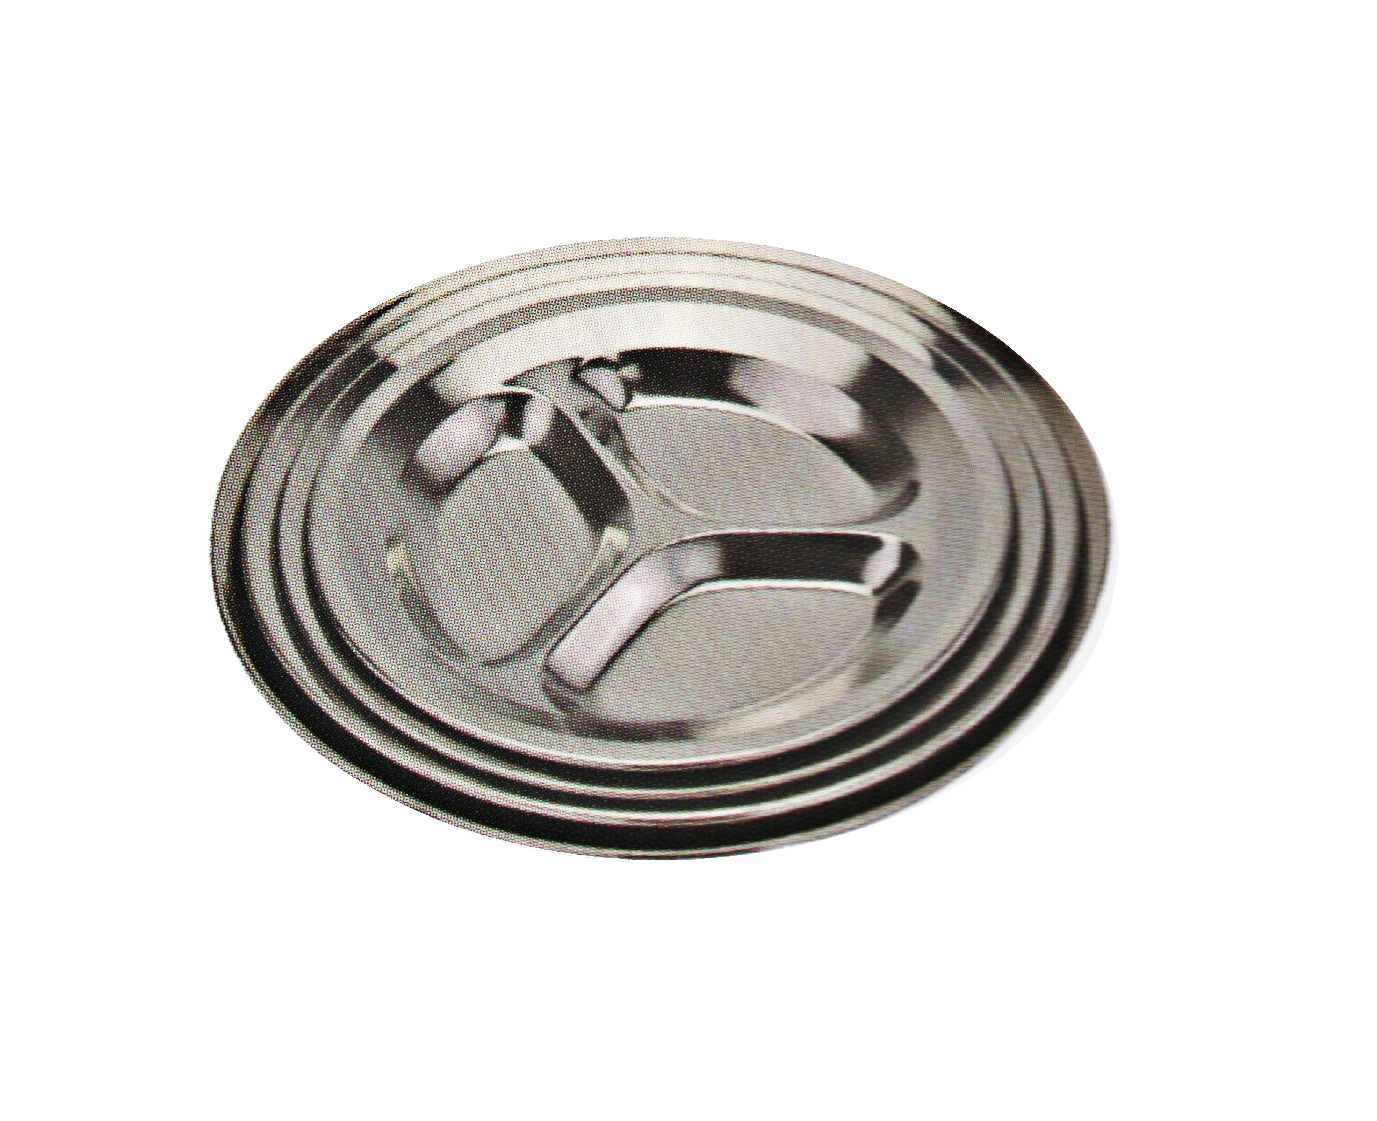 Stainless Steel Kitchenware Oval Tray in Round Design Sp002